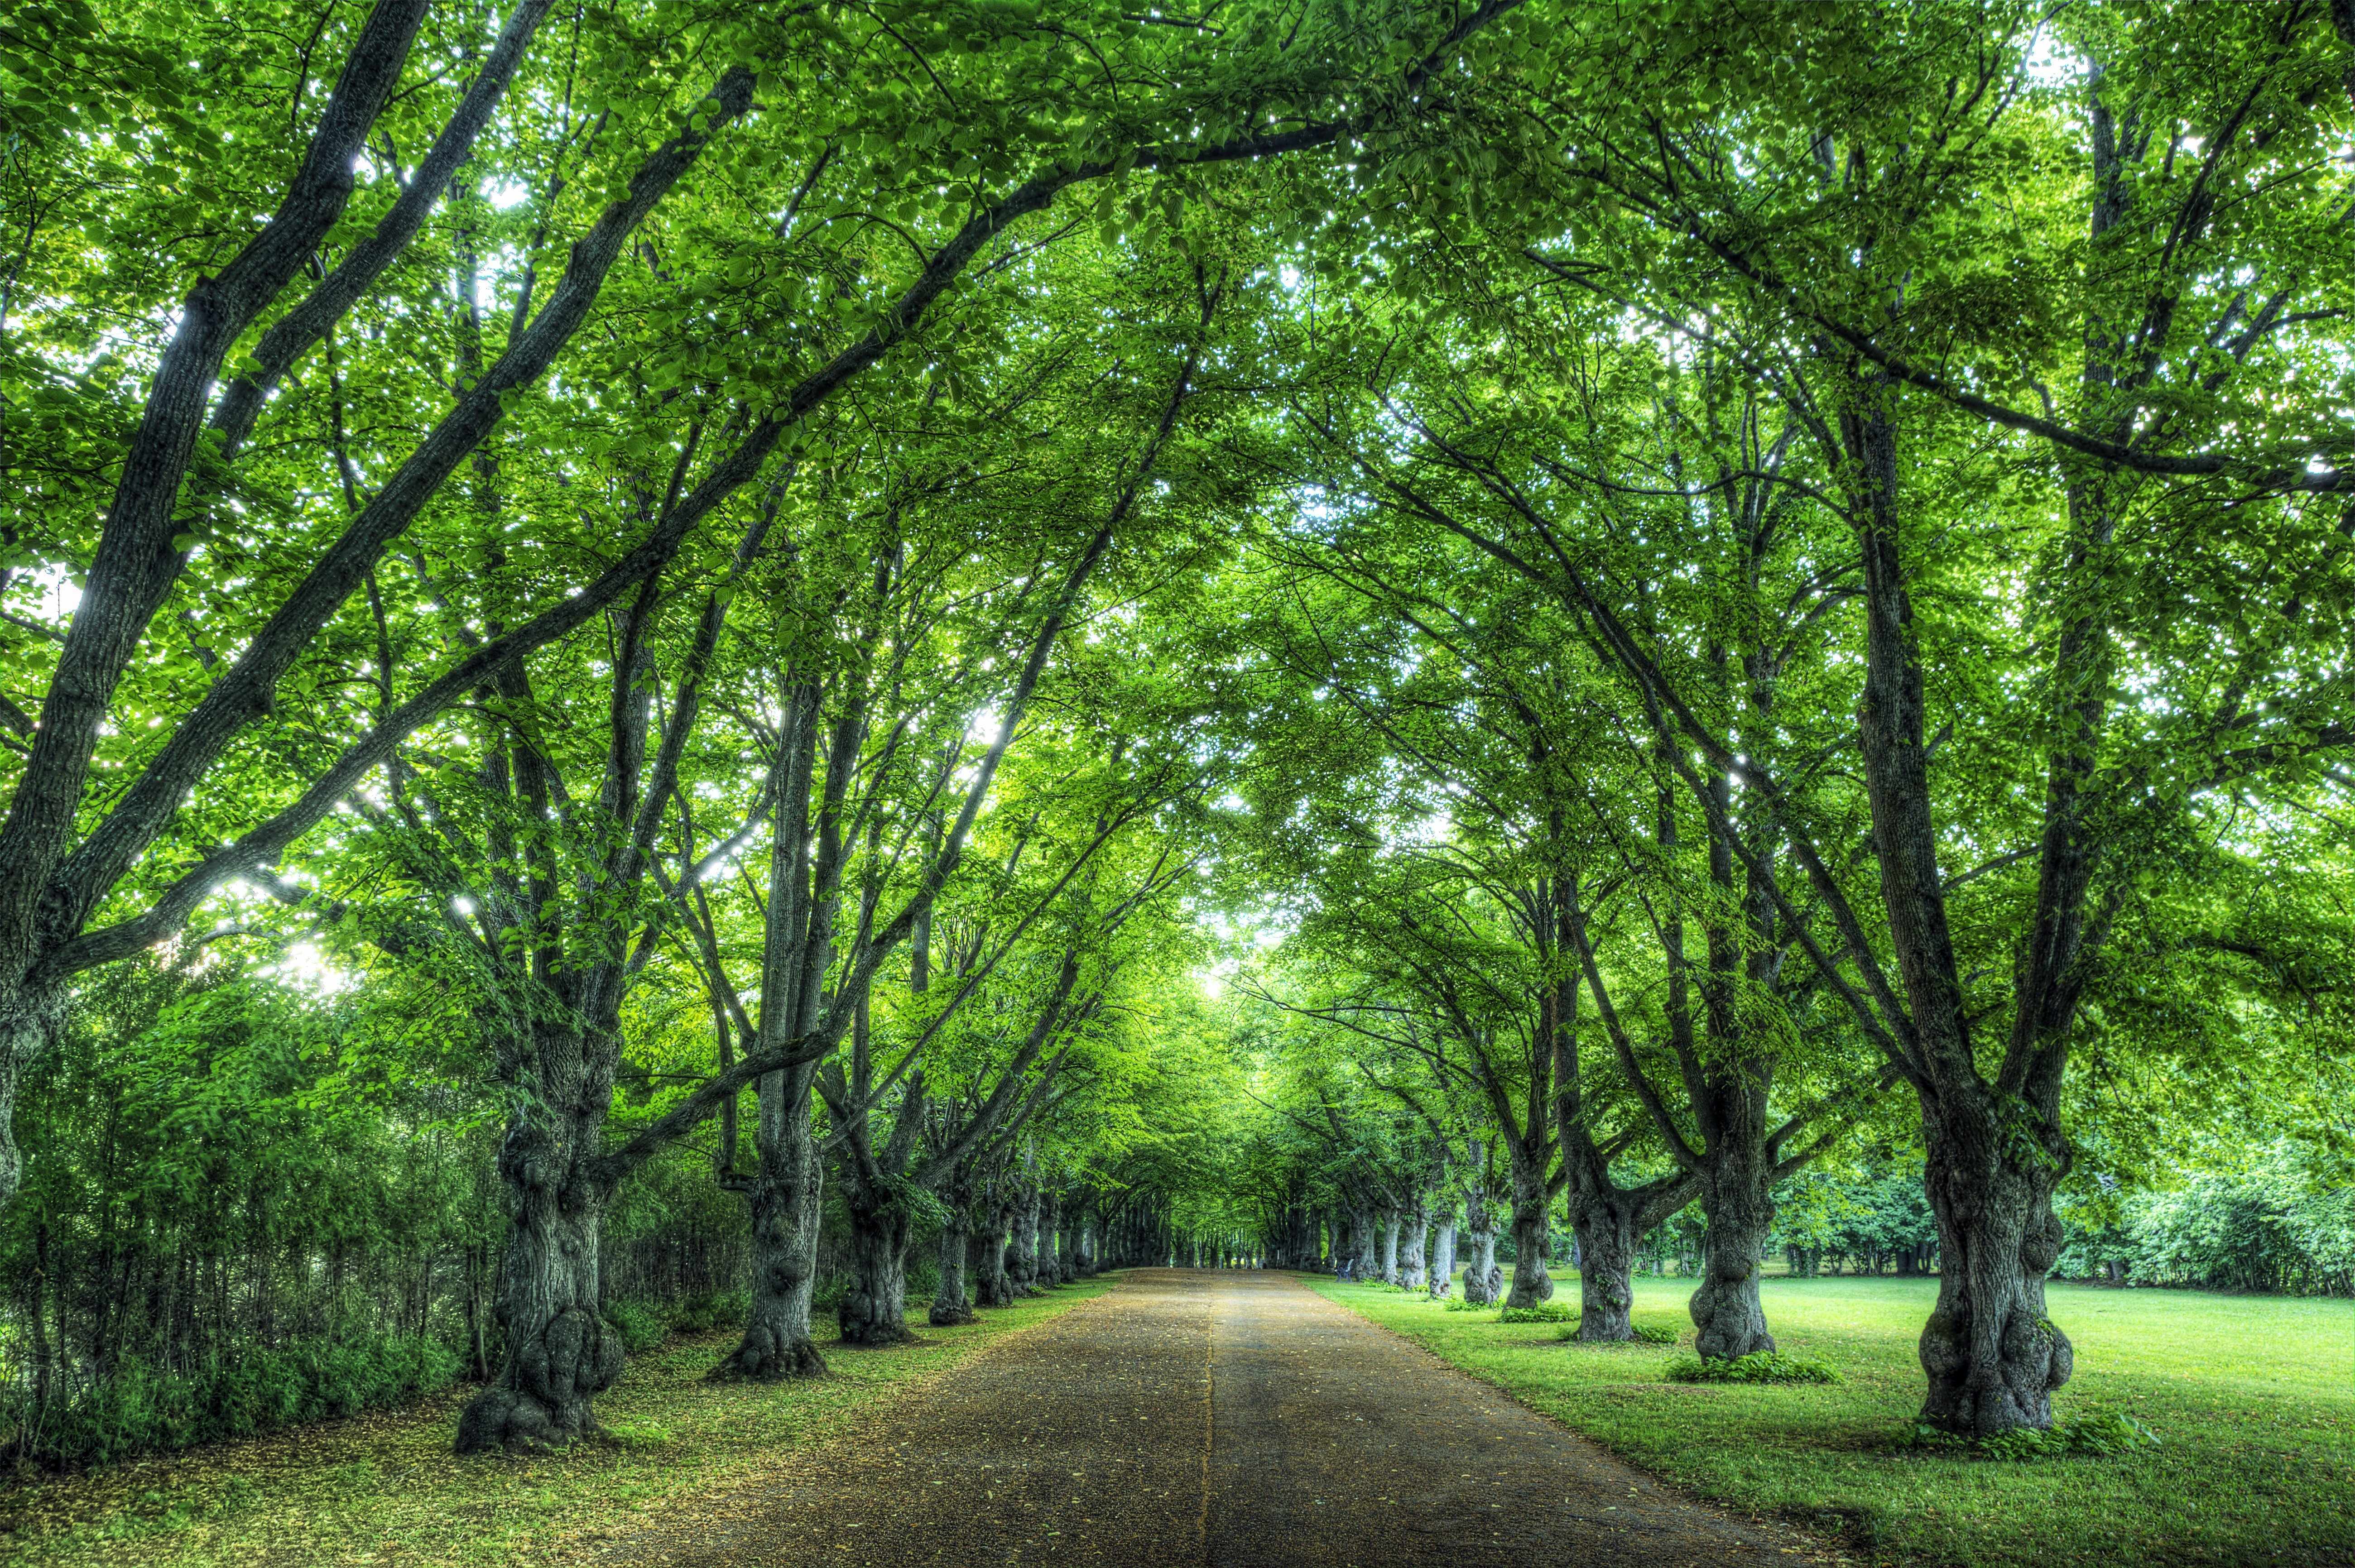 a road lined with green leafy trees, like a tunnel